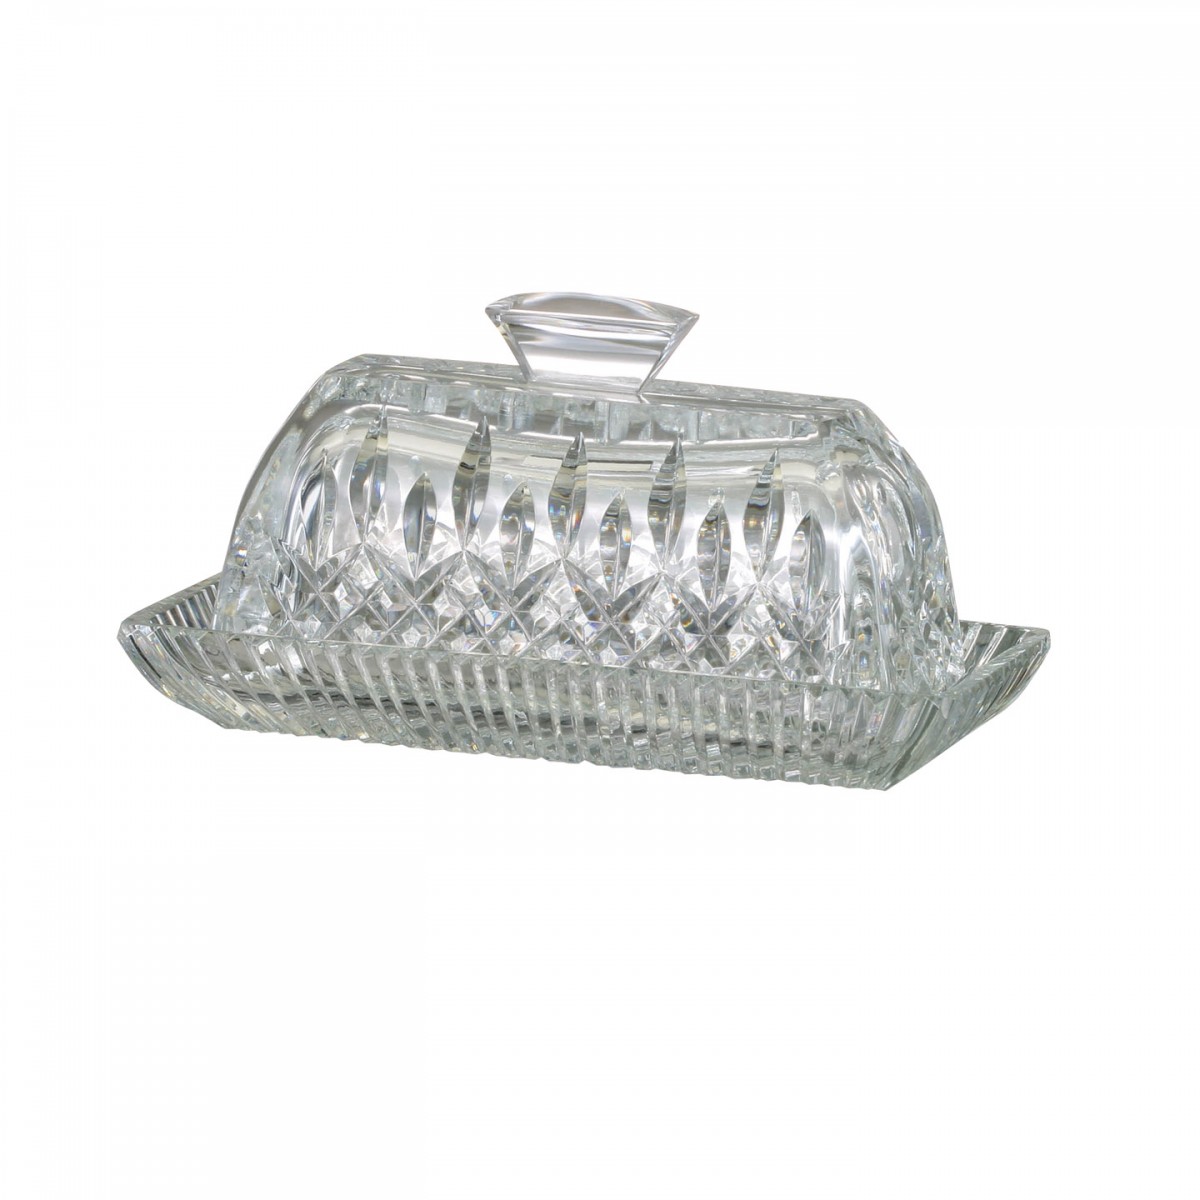 waterford-lismore-covred-butter-dish-024258374805.jpg